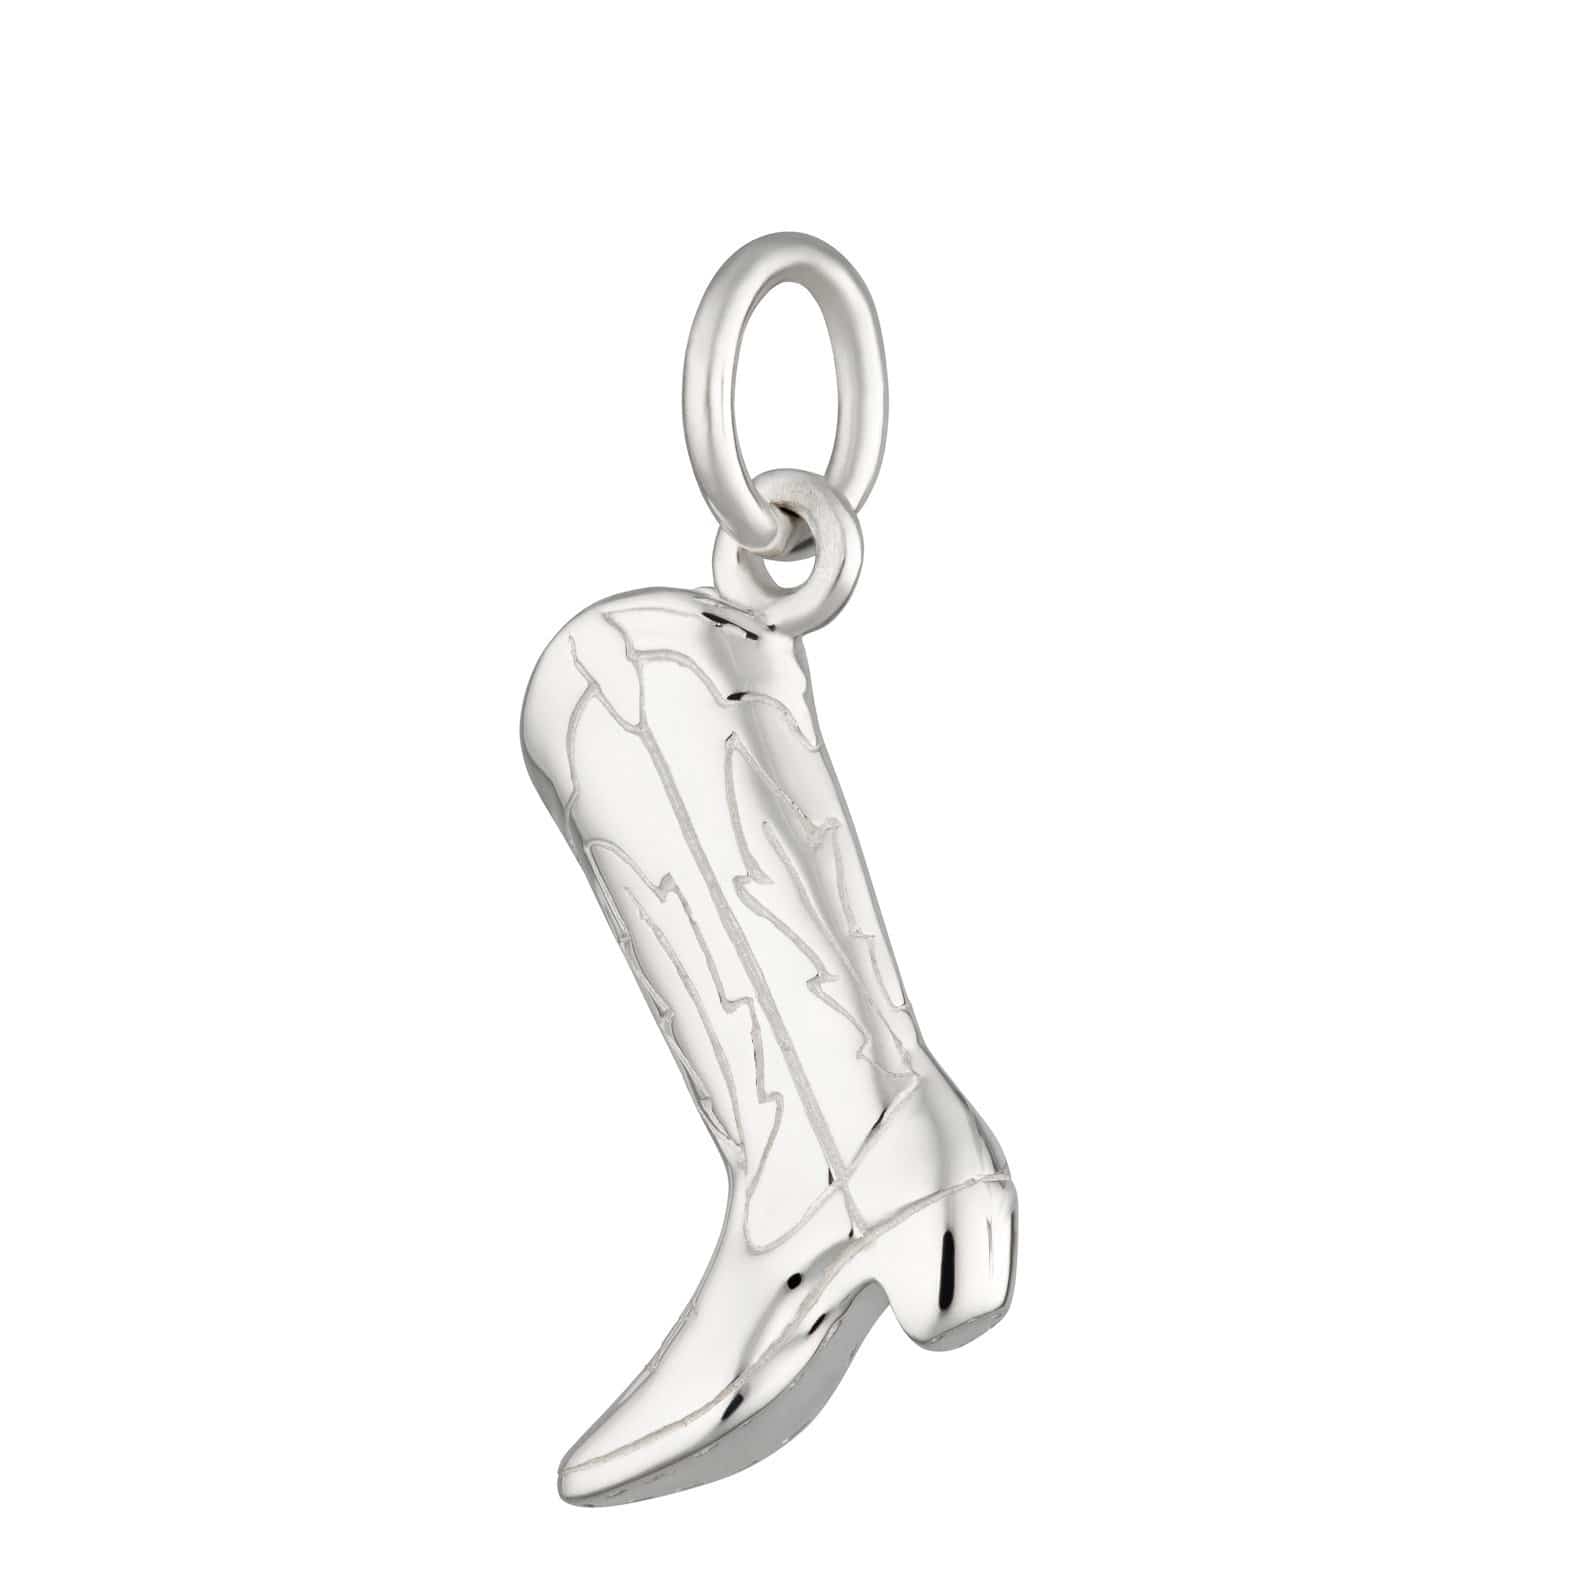 1, 4, 20 or 50 Pieces: Silver Cowboy Boot Charms: Double Sided